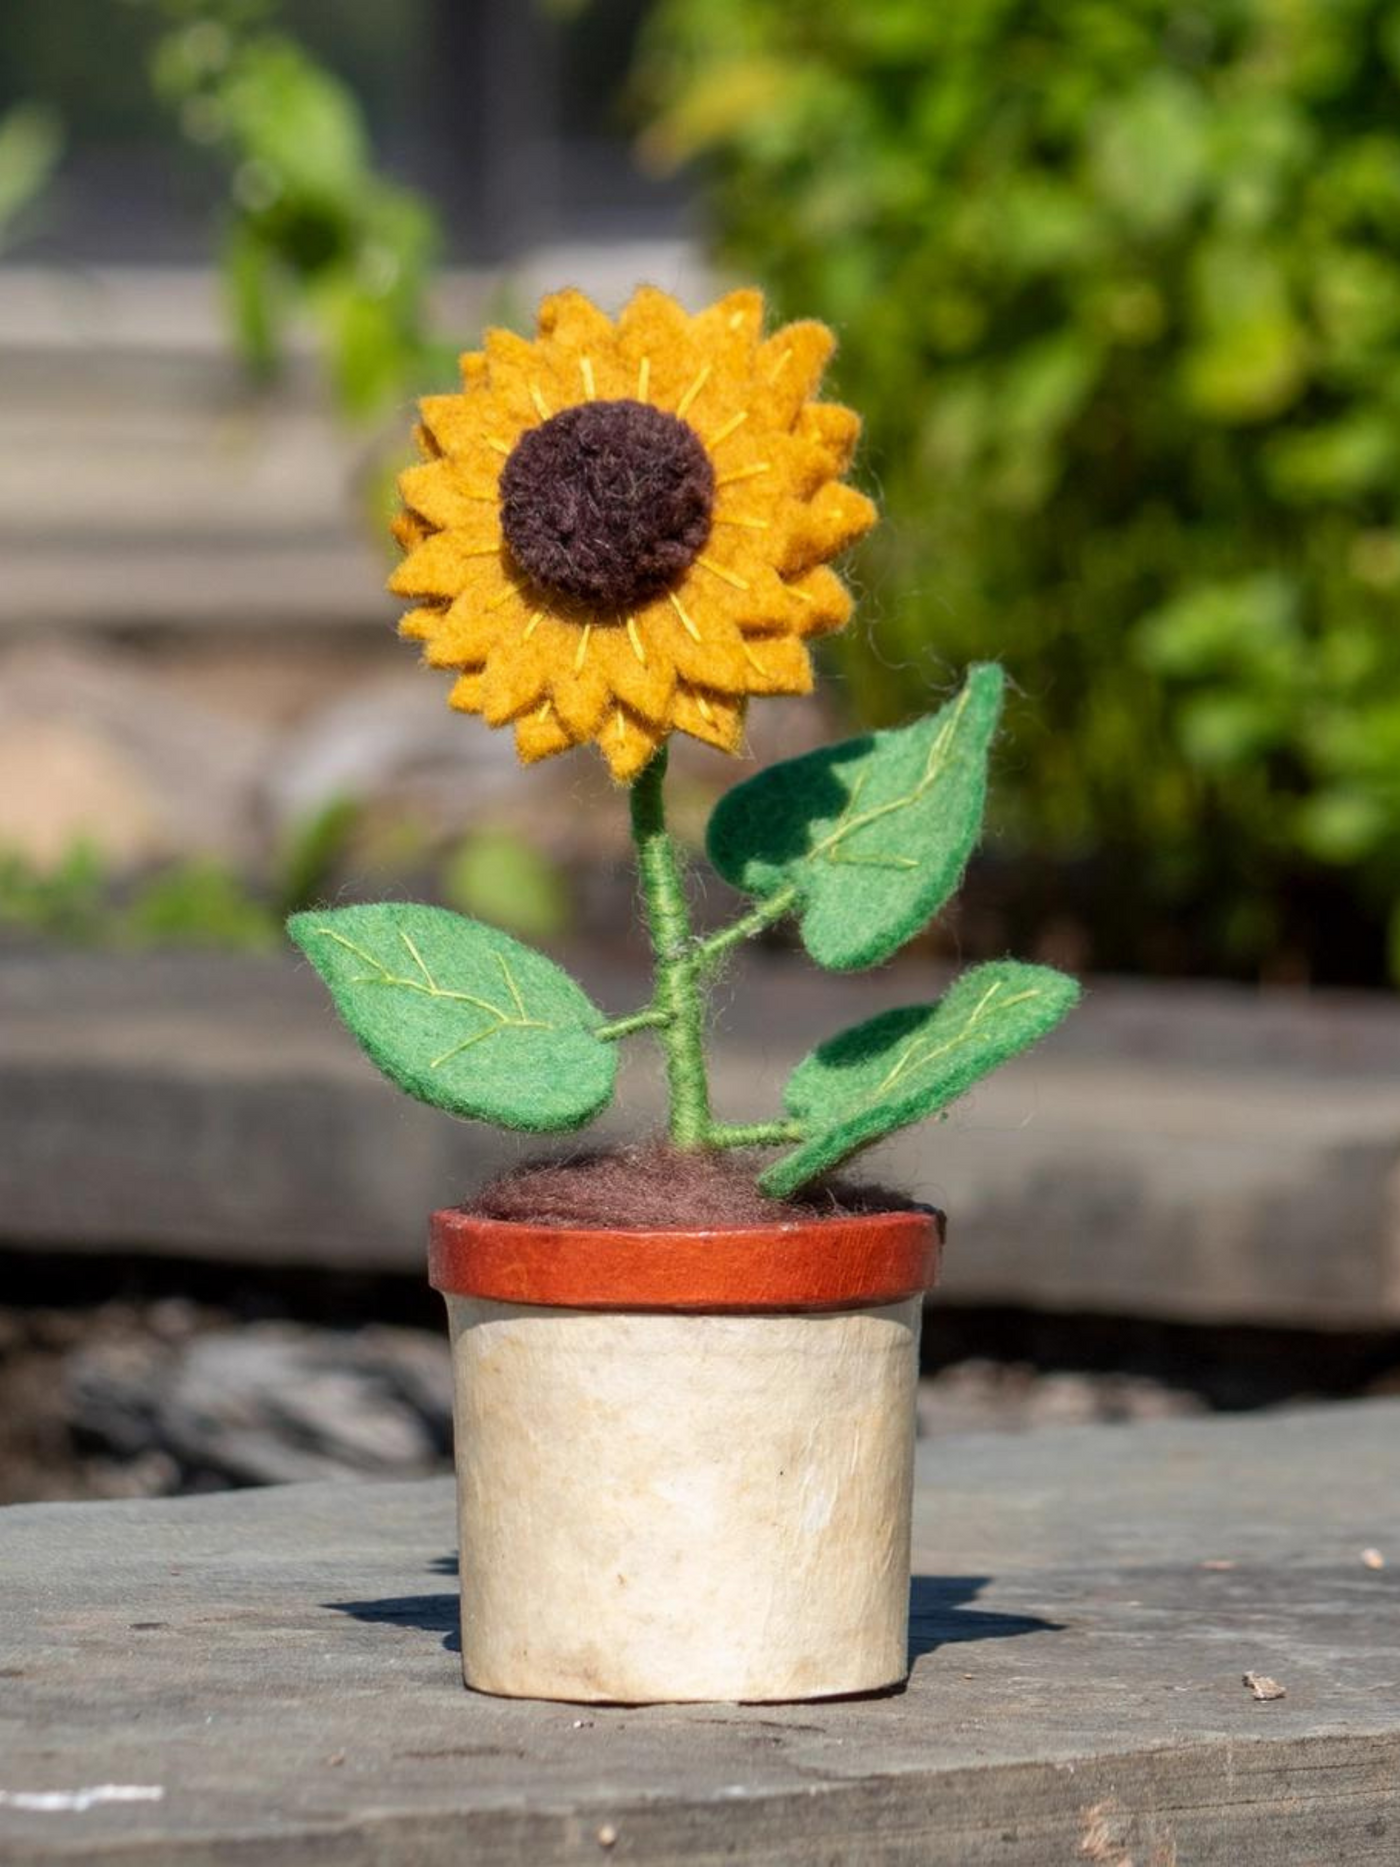 Sunflower Potted Flower